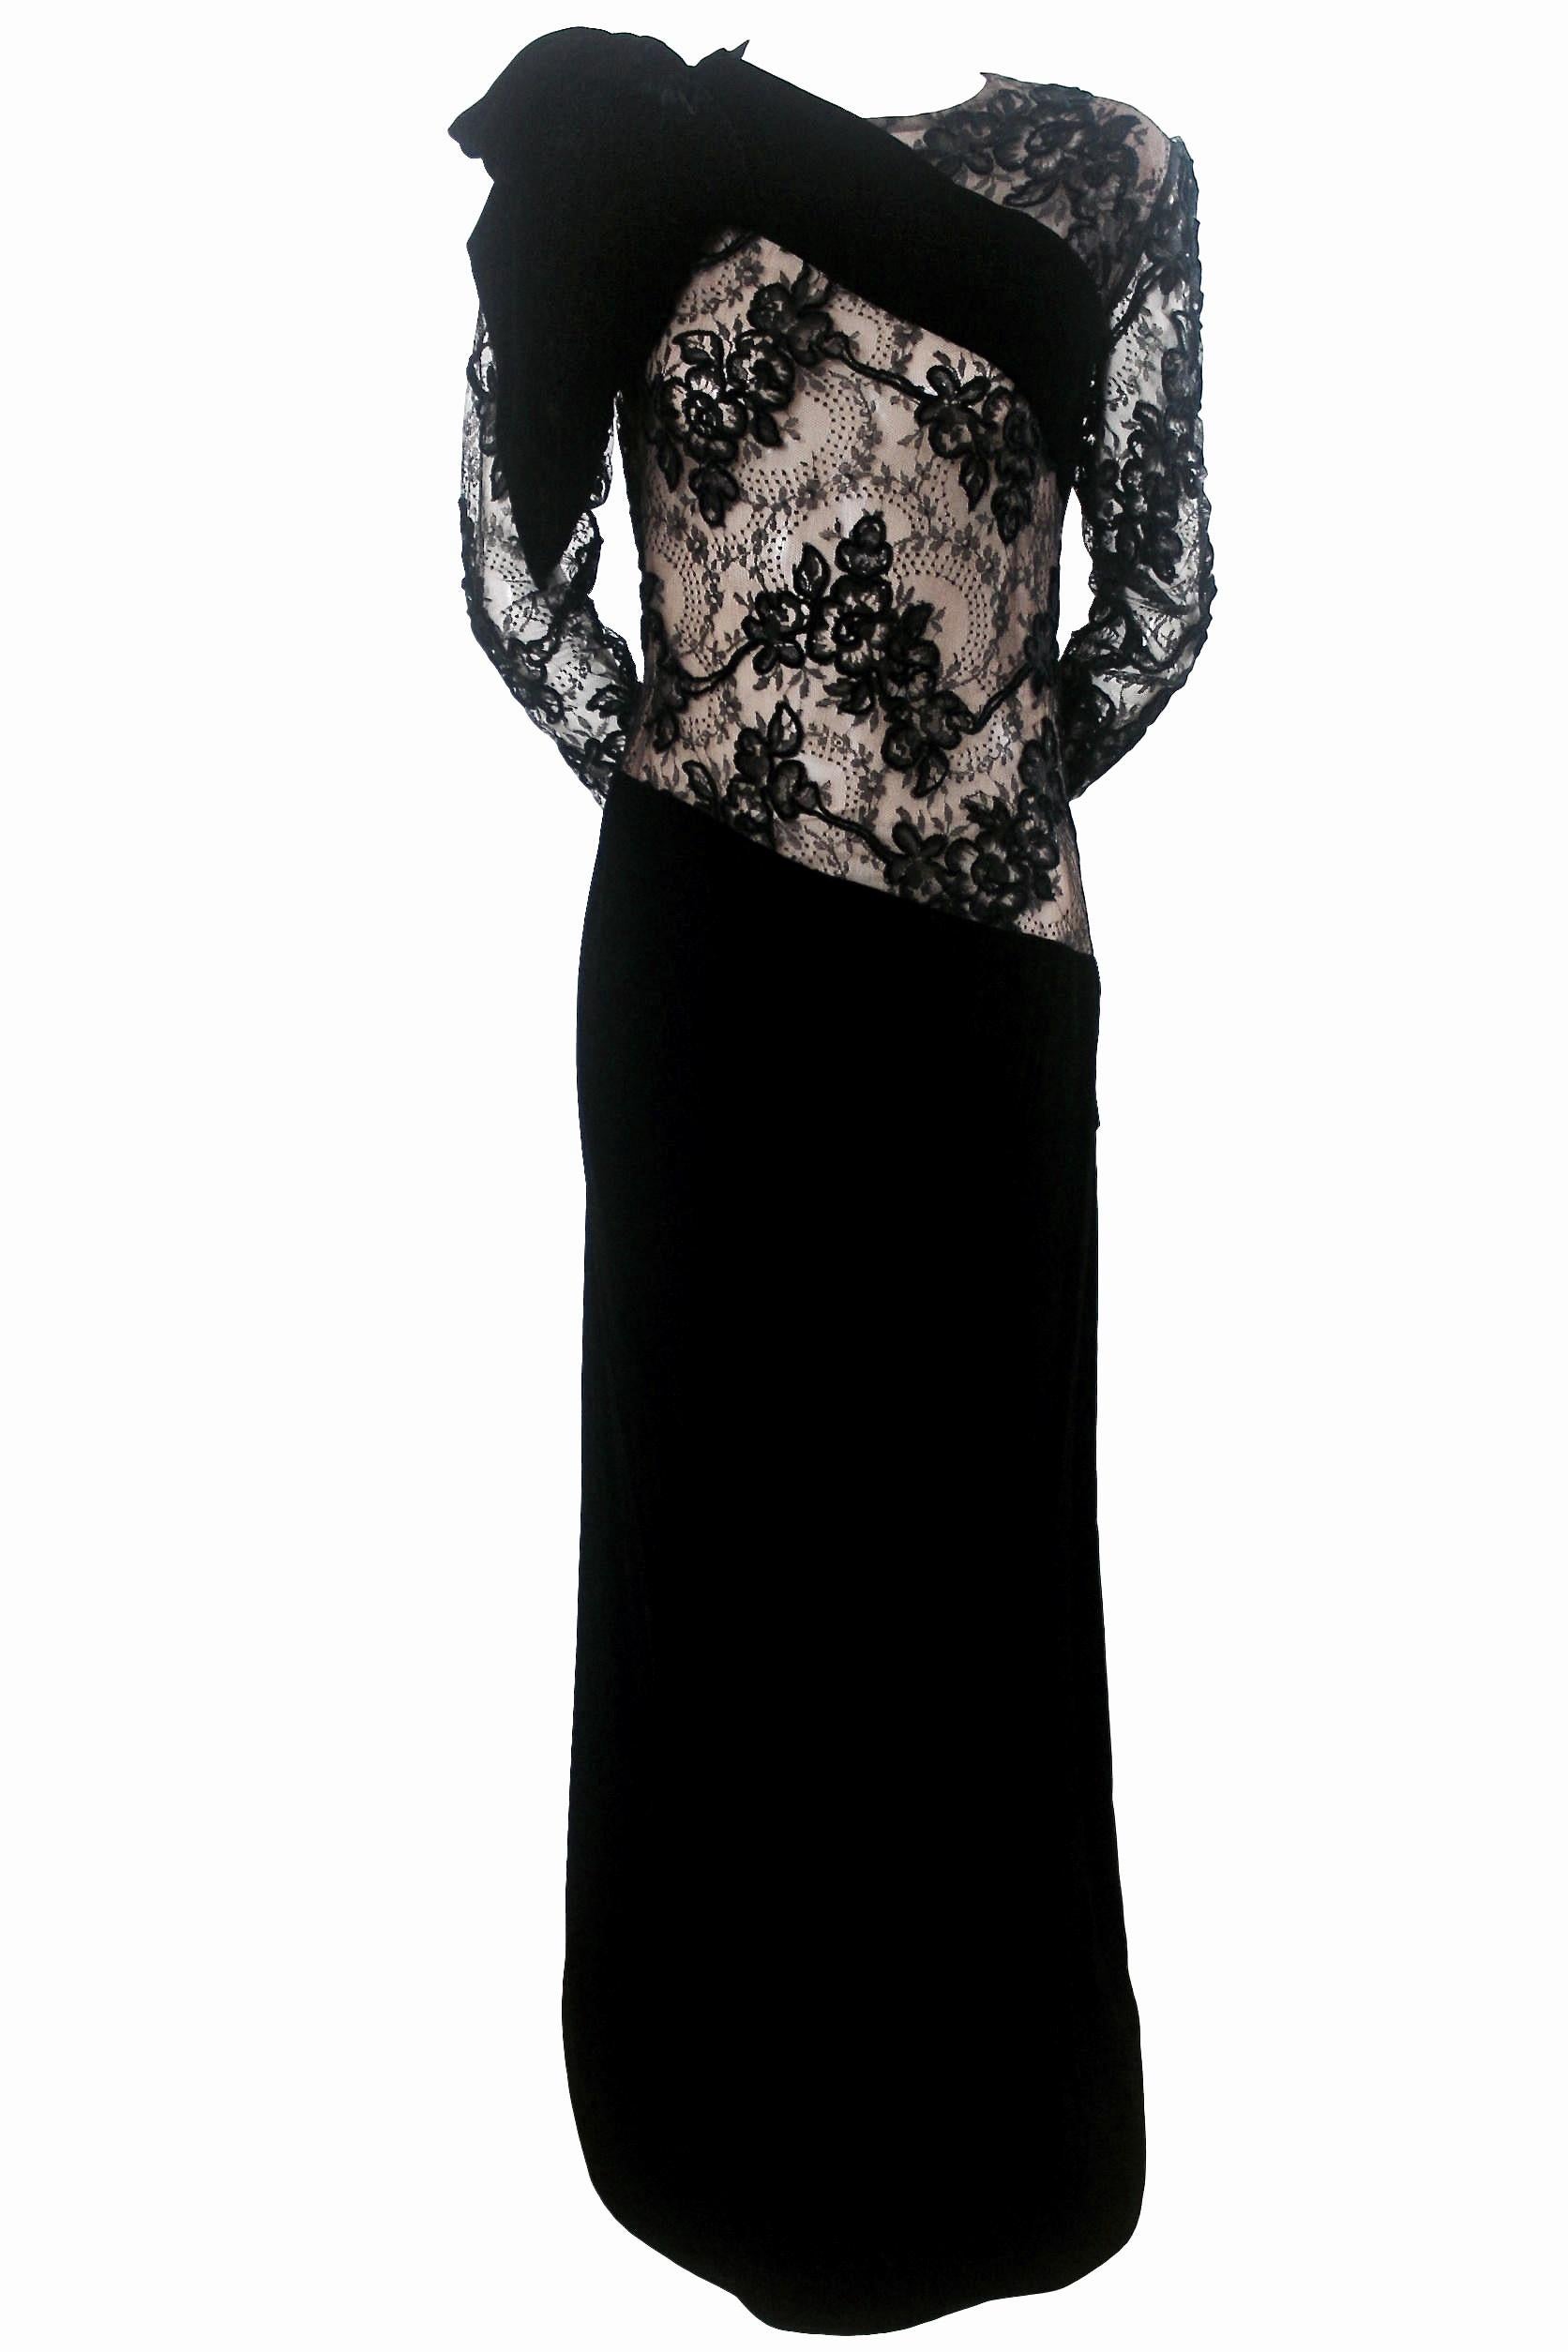 Jacqueline de Ribes Velvet and Lace Evening dress with Large Bows In Good Condition For Sale In Bath, GB